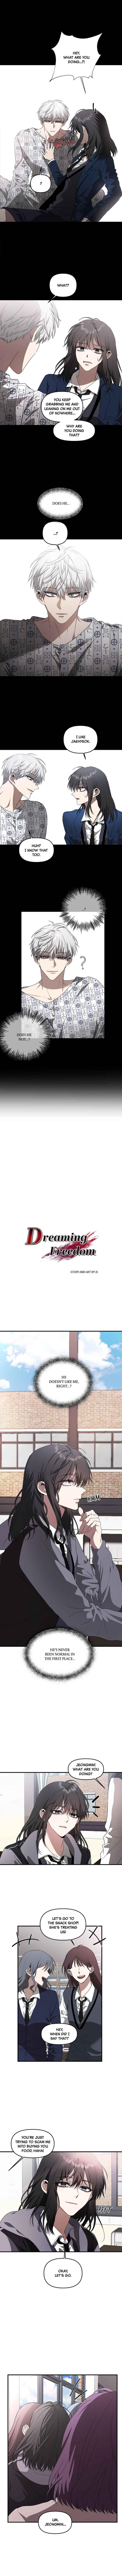 Dreaming Freedom  - page 2